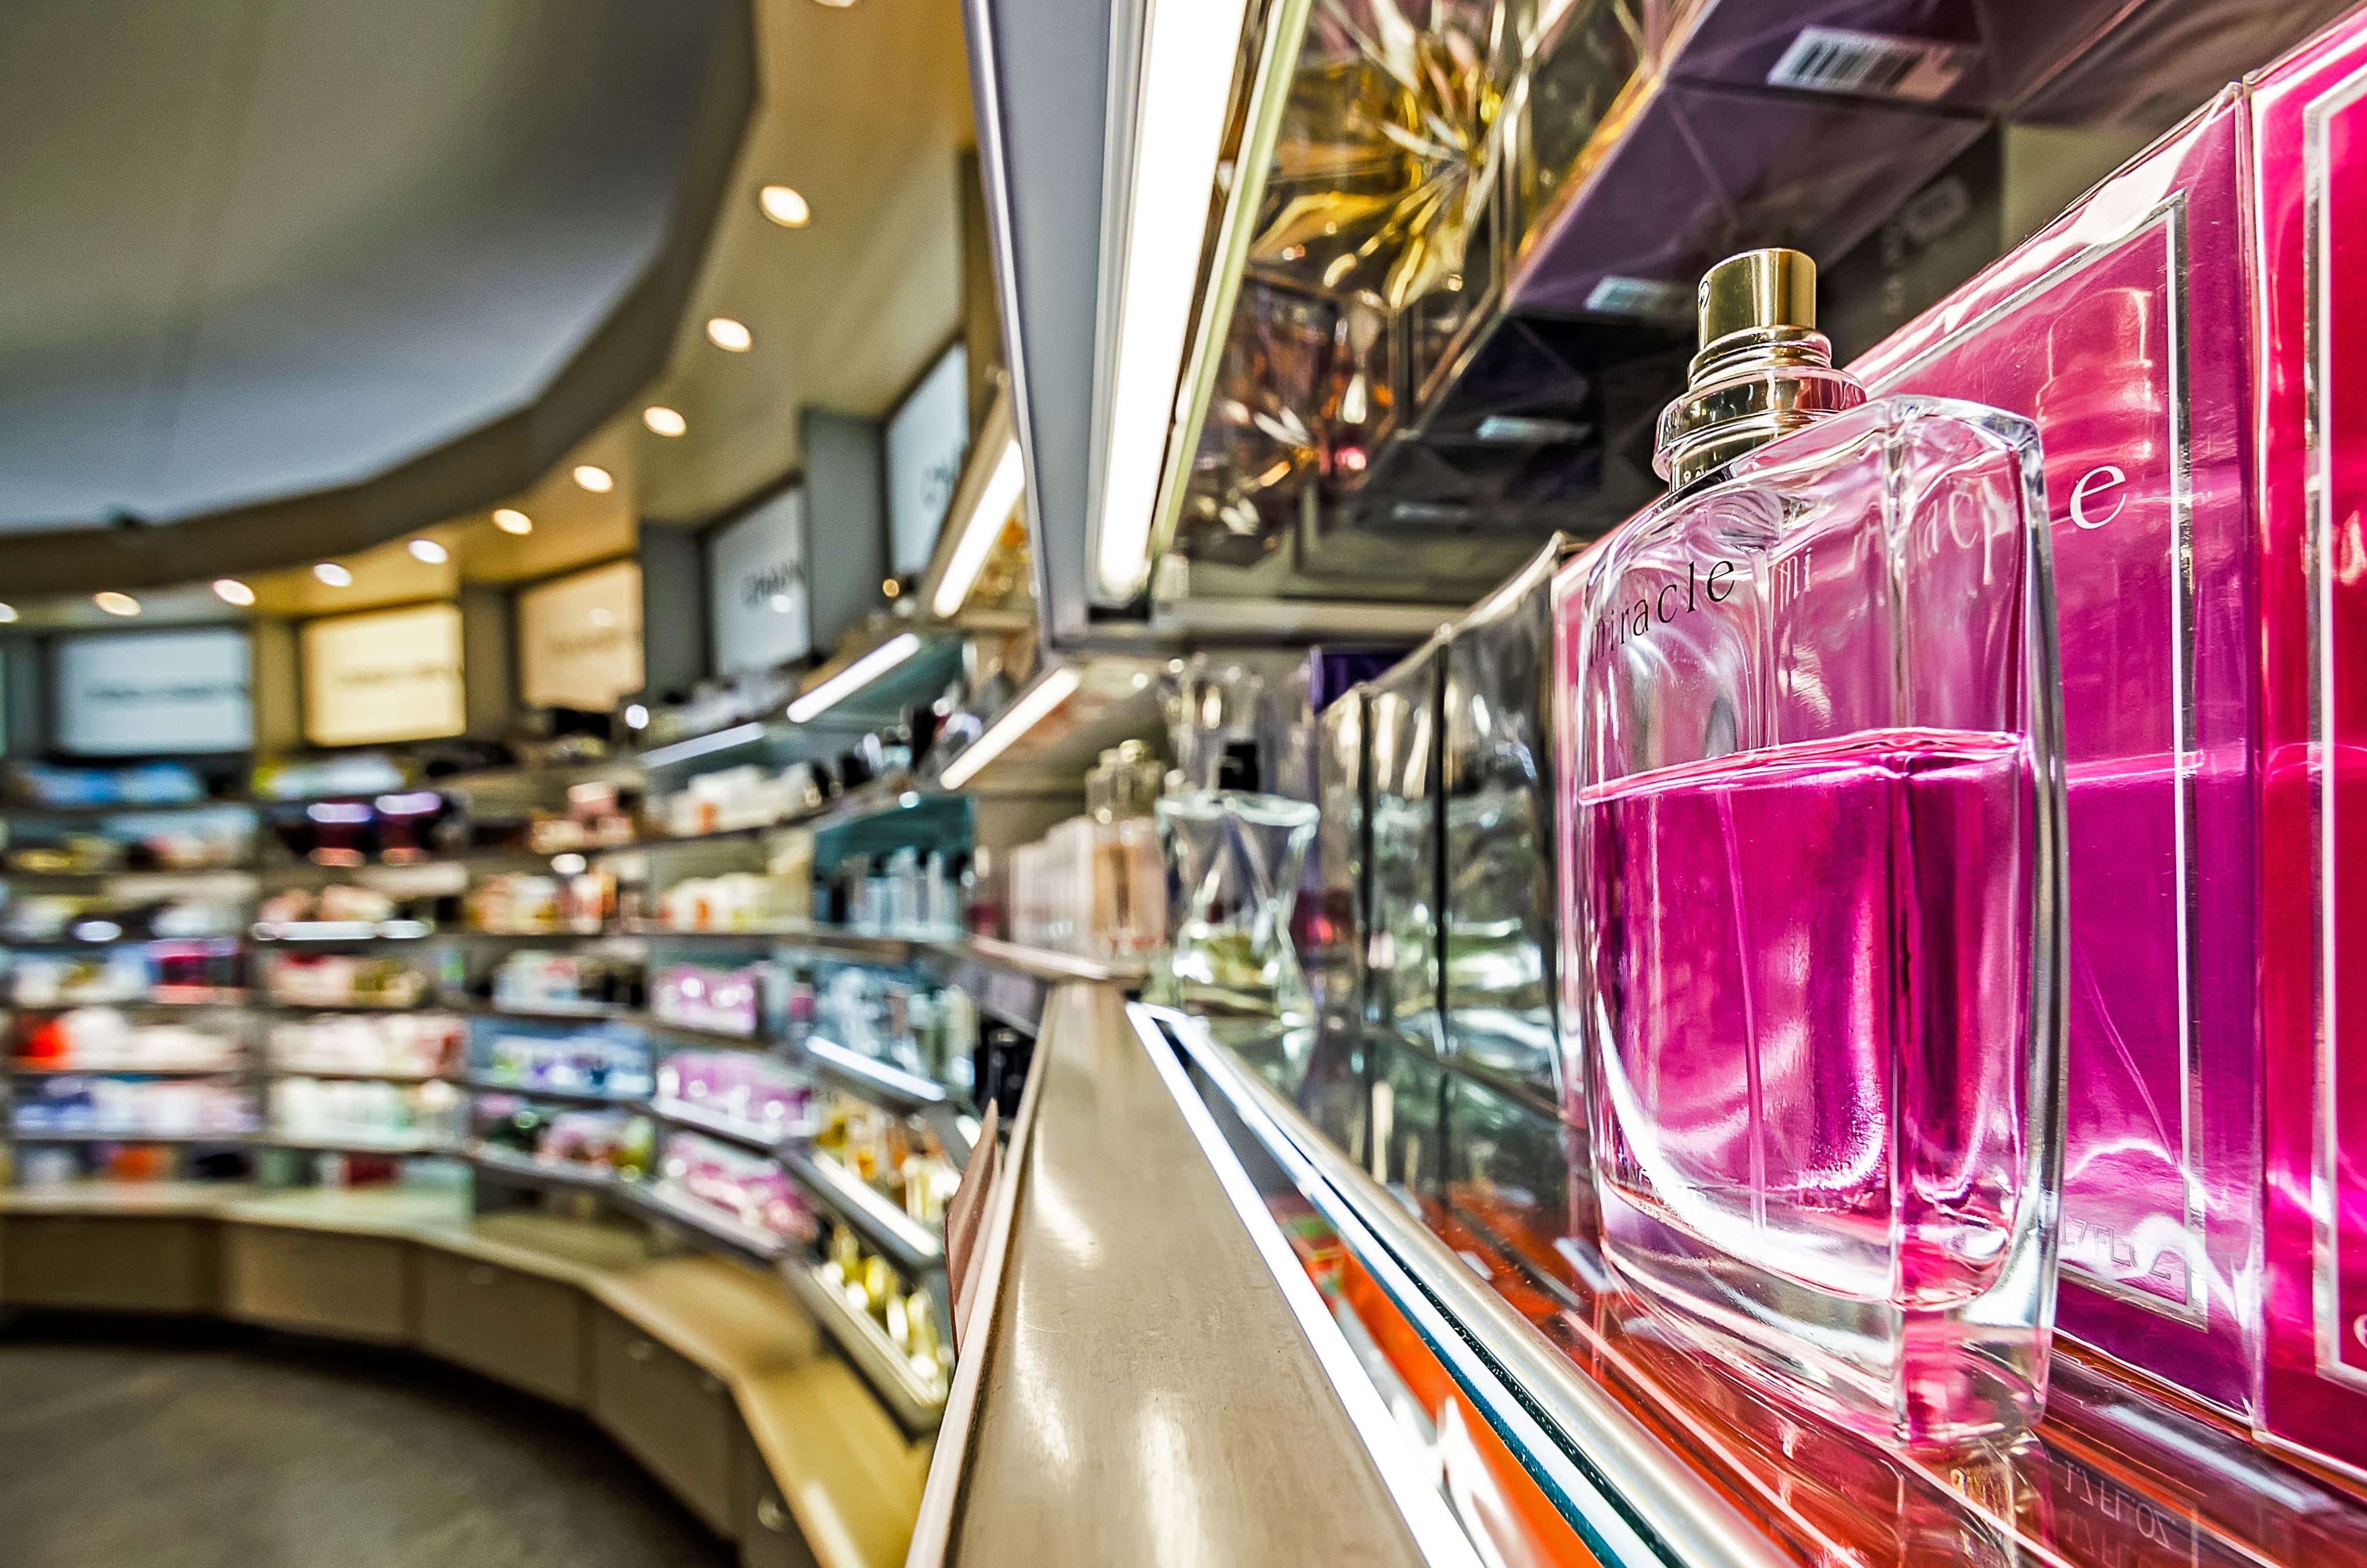 Proper lighting can make or break your cosmetic display. Ensure that each product is well-lit, allowing customers to see colors and details clearly.